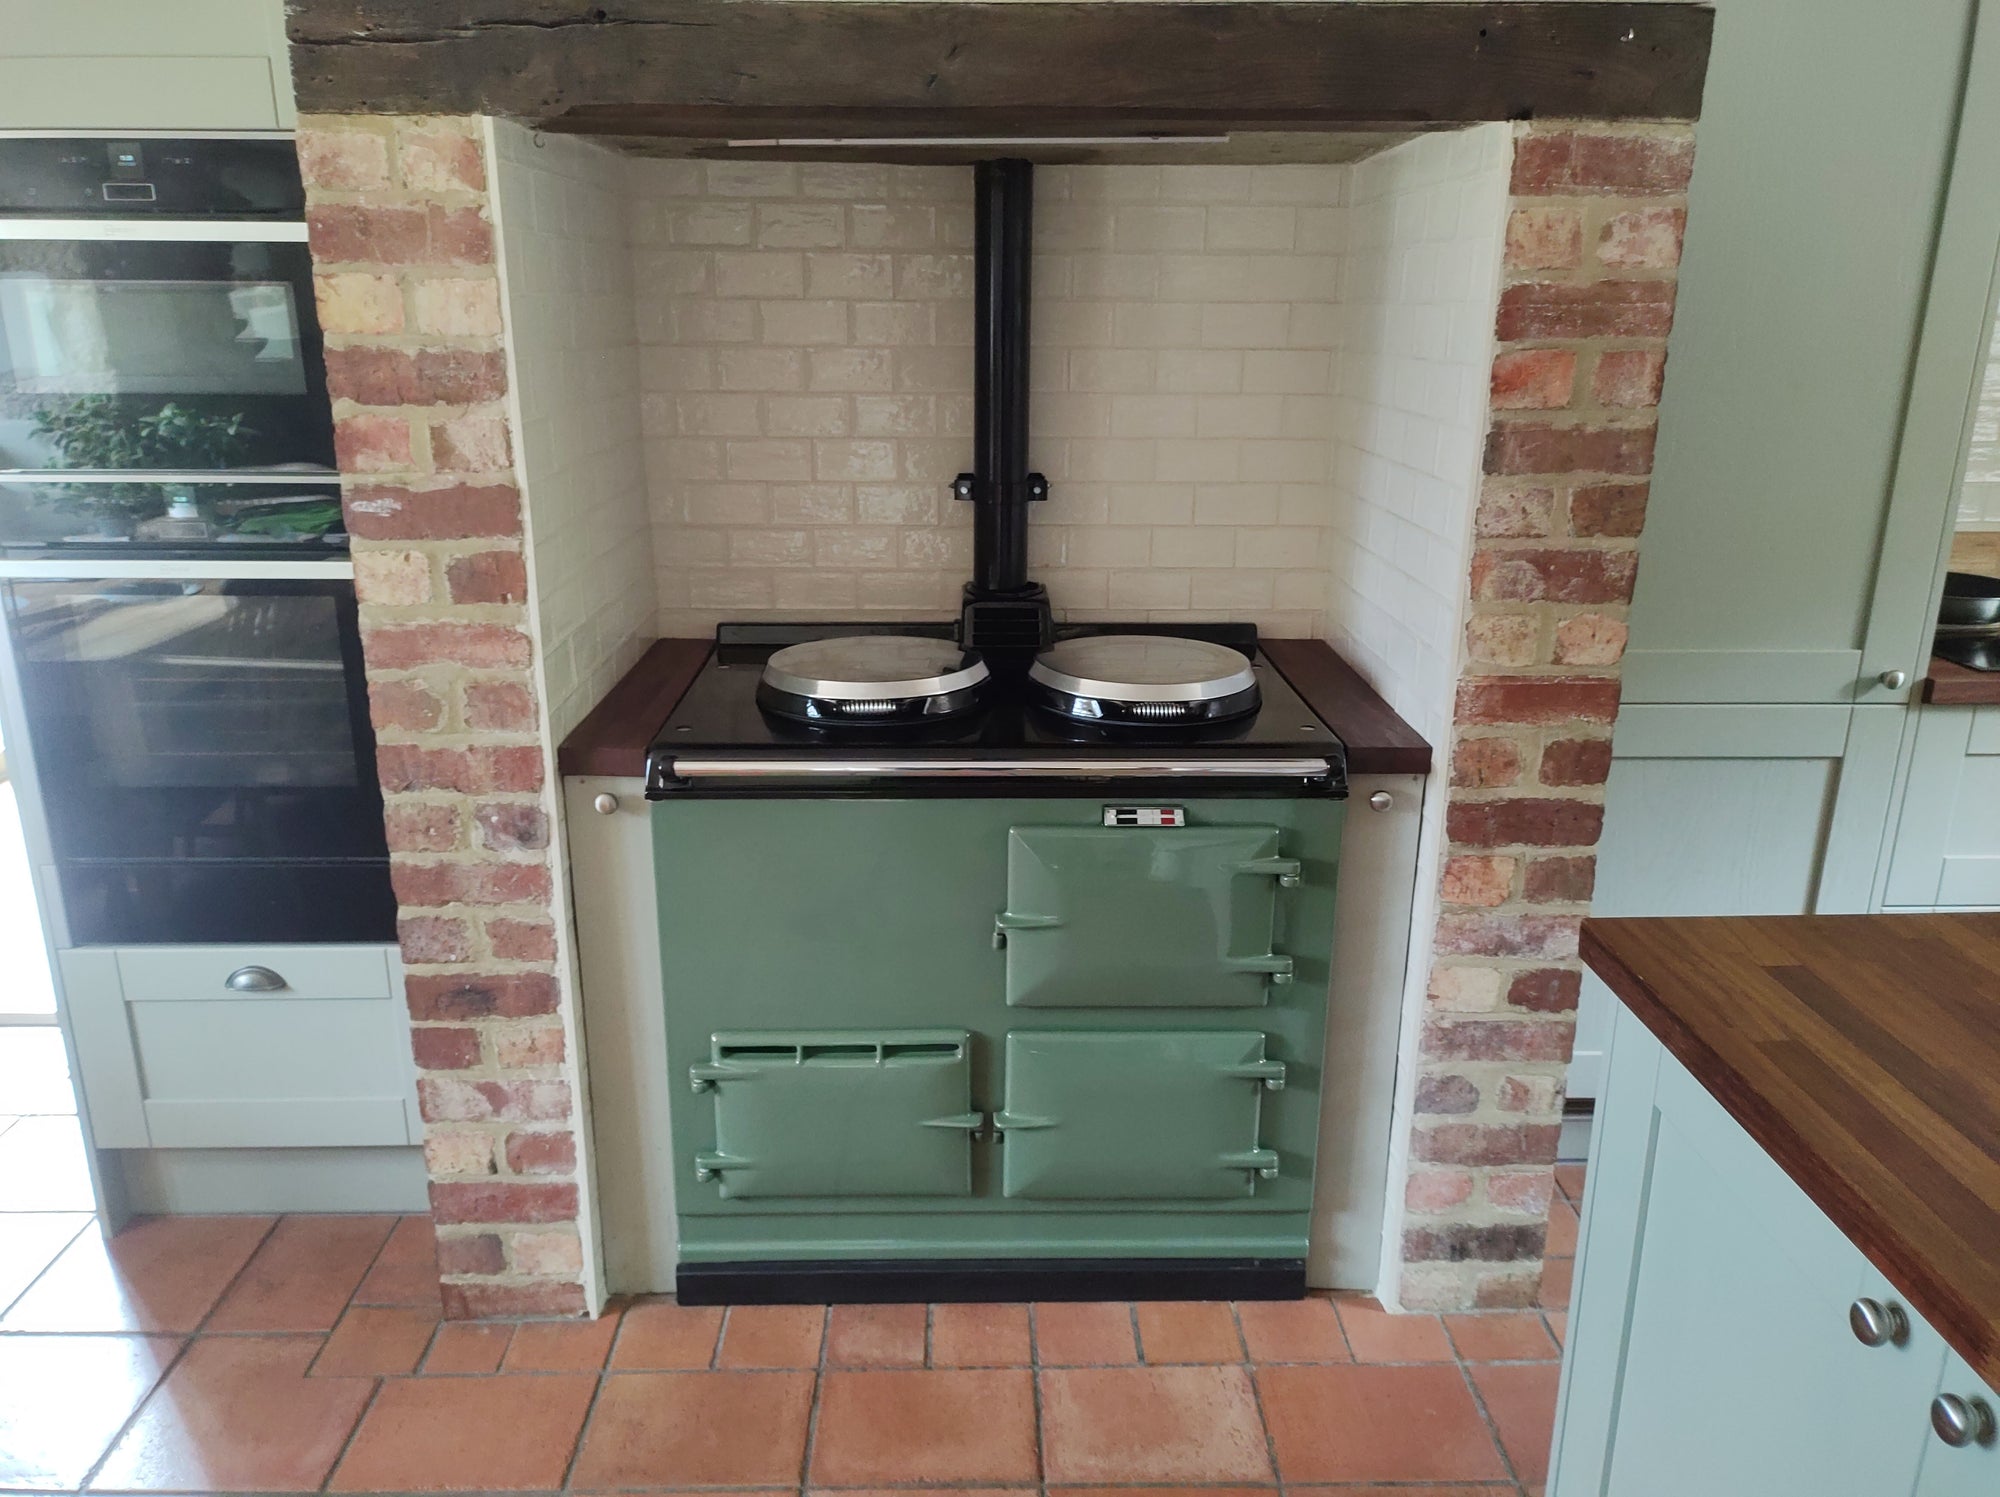 Modern 2 Oven Deluxe Aga Range Cooker Re-enamelled to 'Scullery Green' And Converted to the 'Elektrikit' System in Kettering